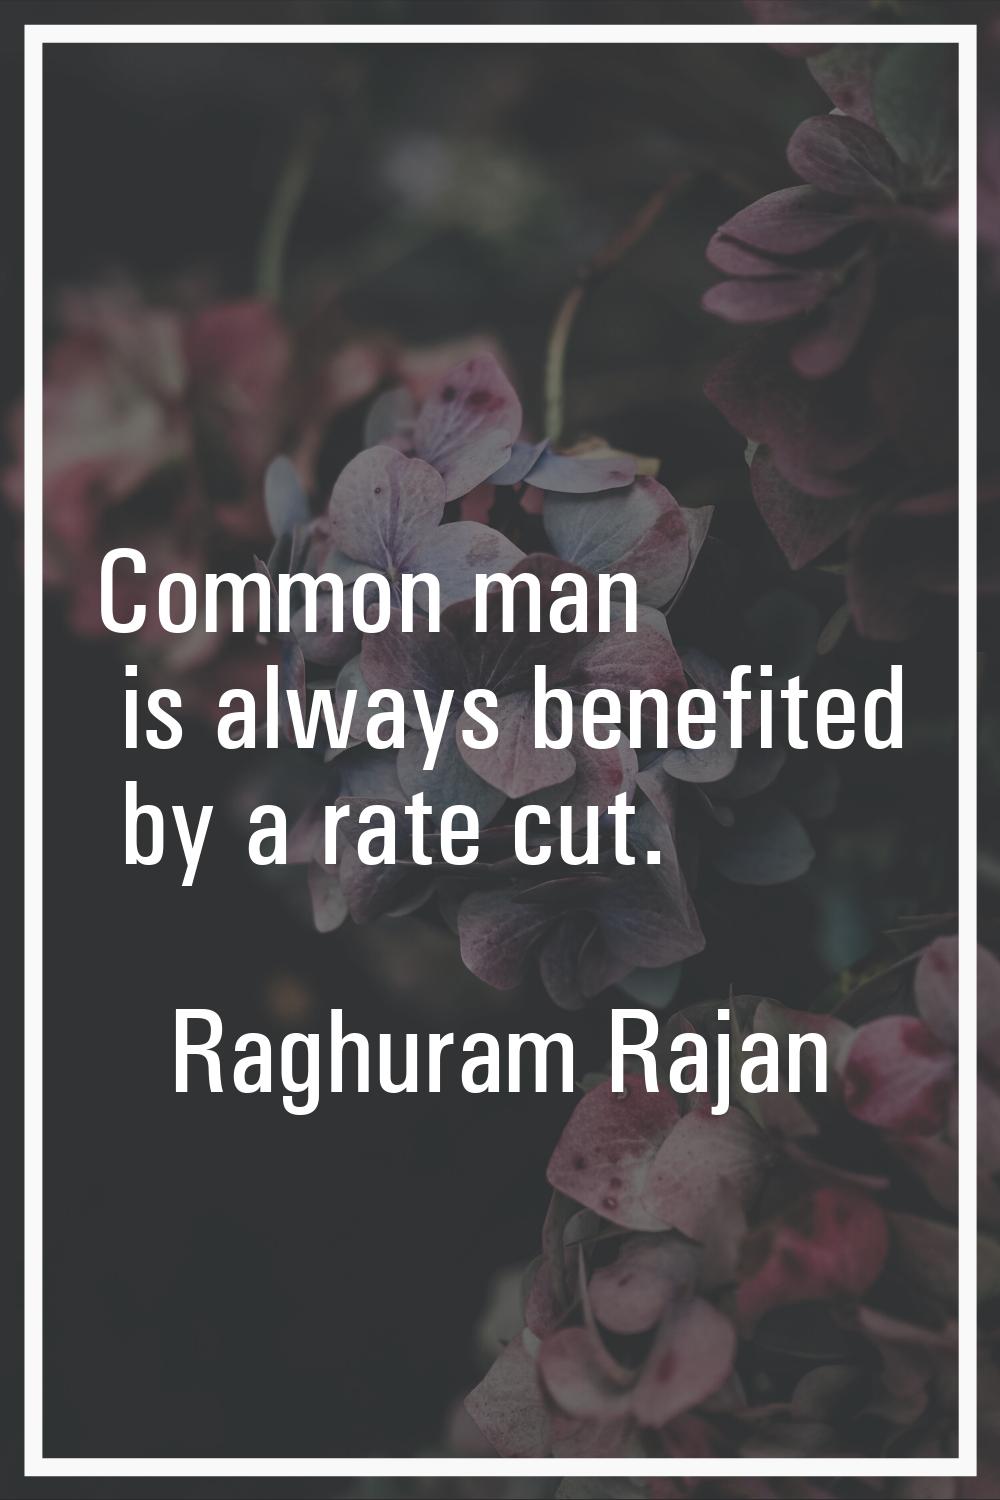 Common man is always benefited by a rate cut.